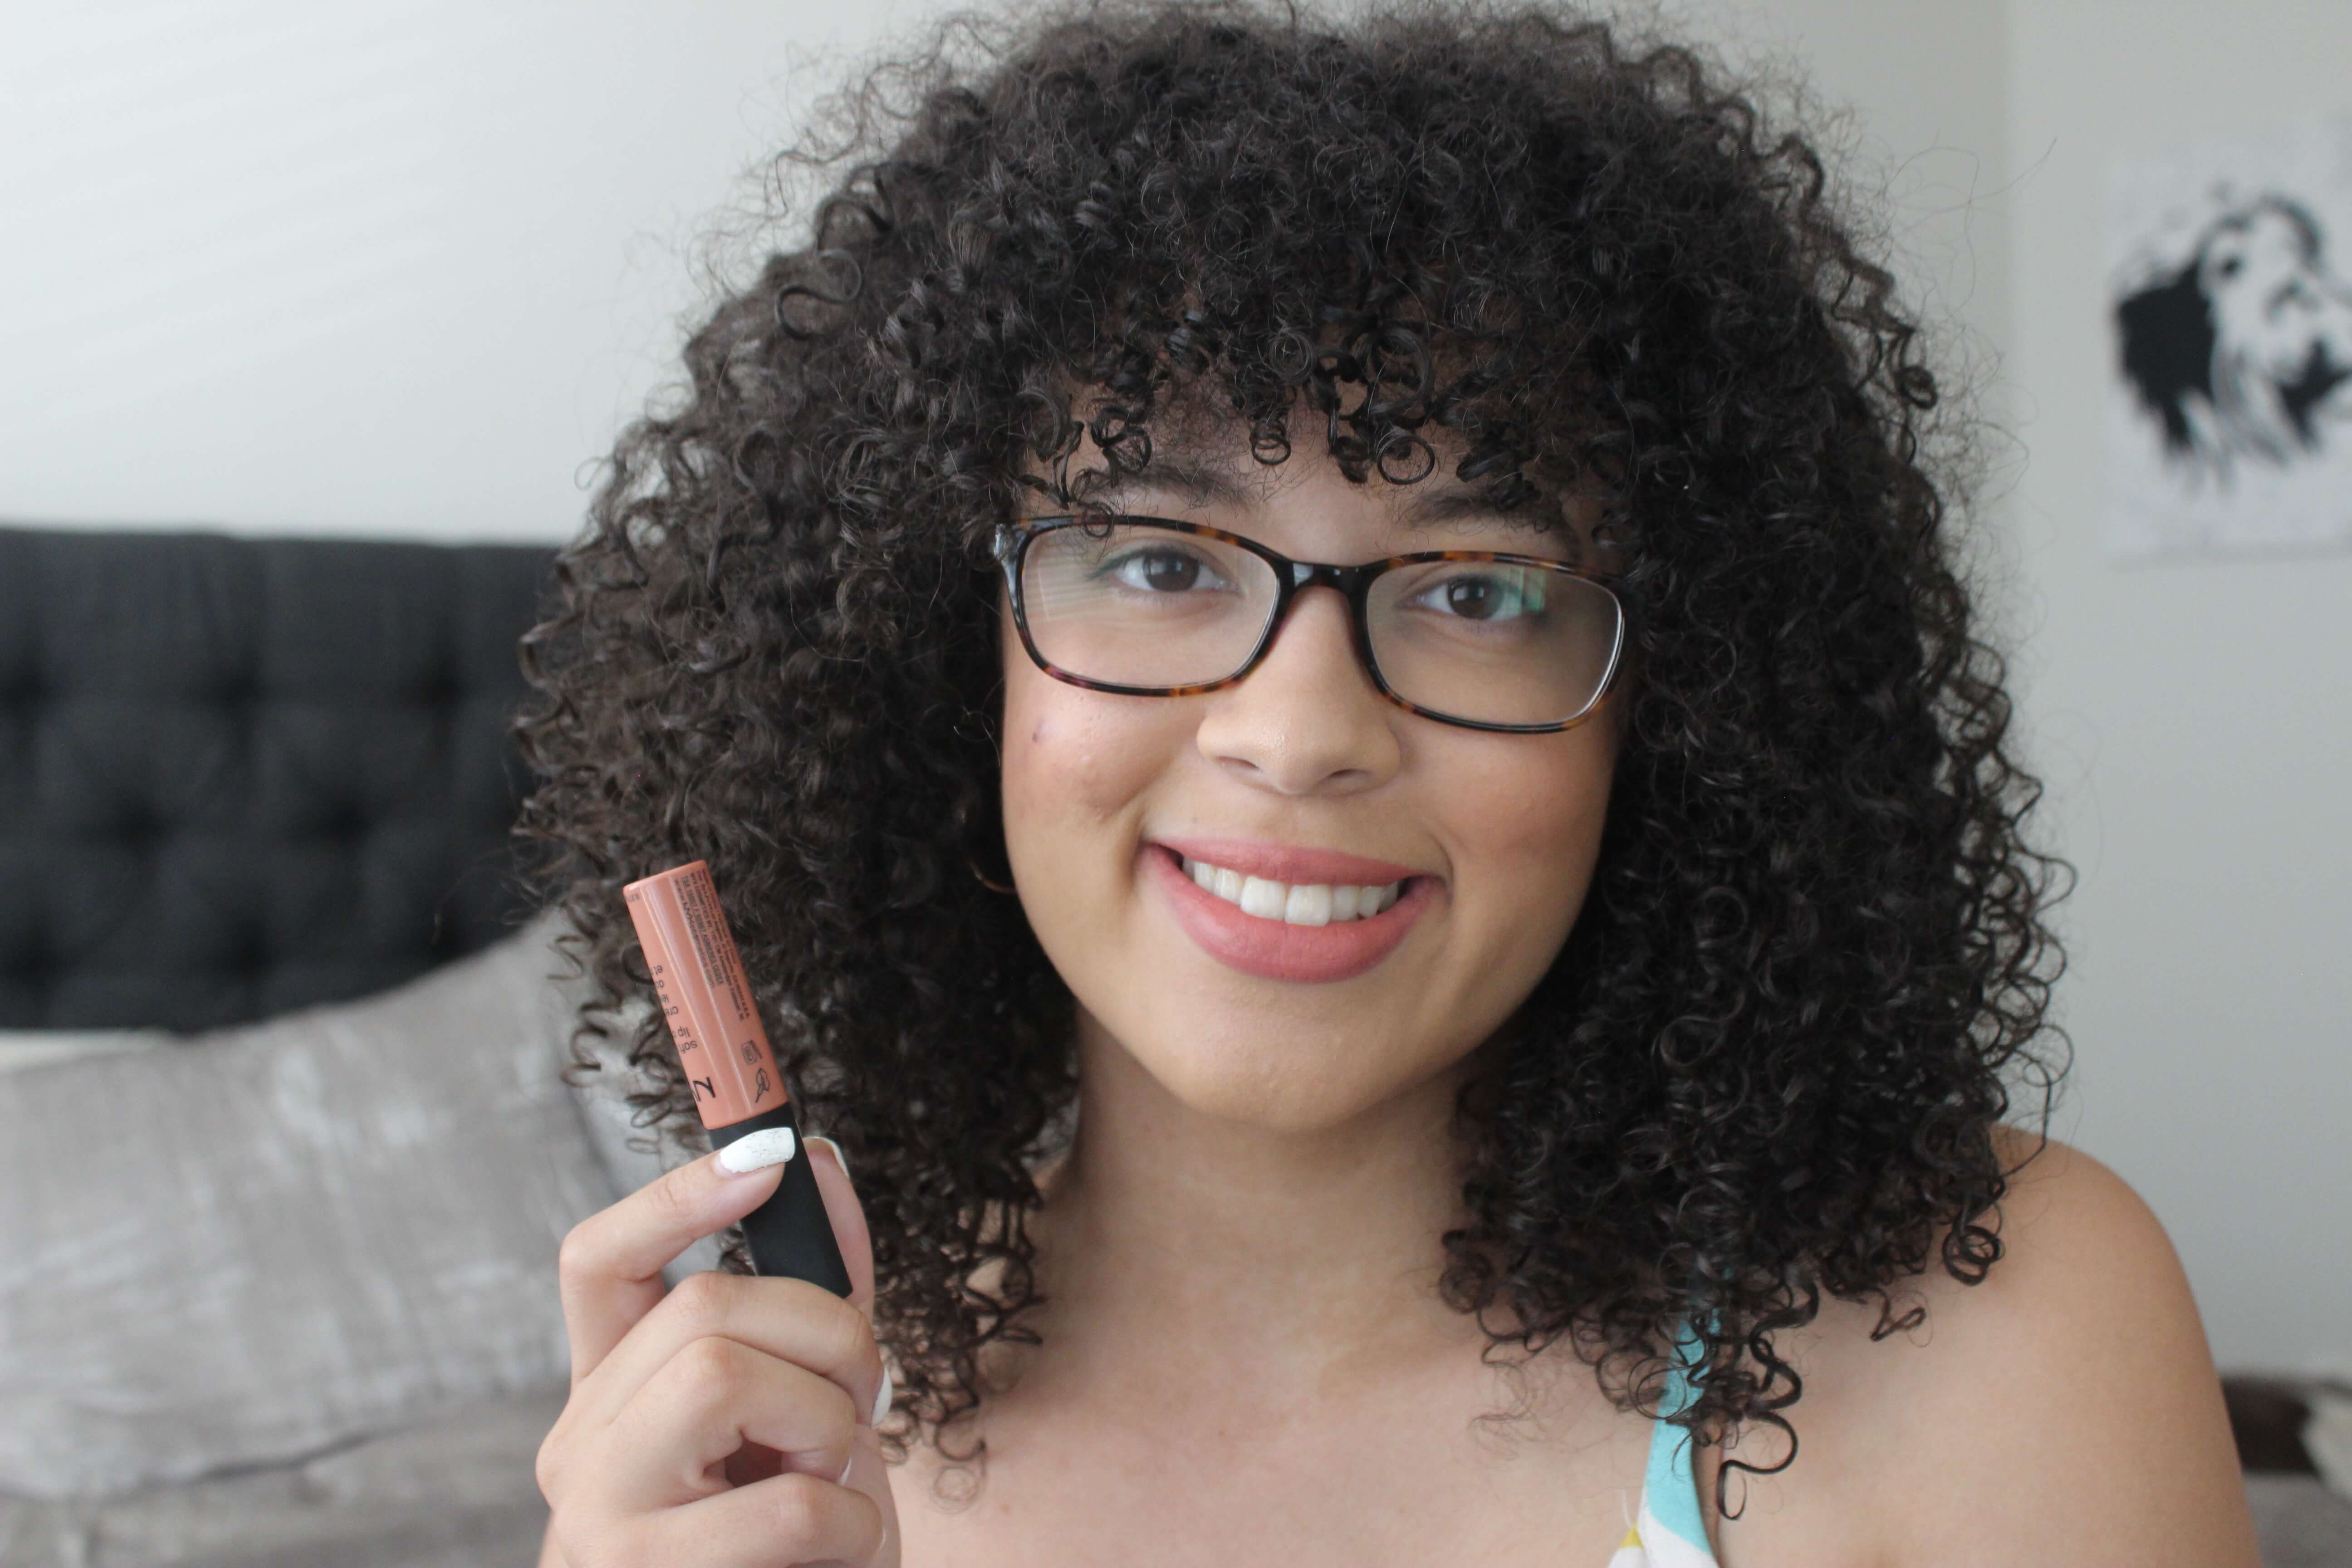 Nude lip products are my go-to for a simple, easy makeup look or whenever I’m going for a bold eye makeup. I’m sharing today my top 6 favorite nude lip products, from glosses to lipsticks. These are perfect shades if you are light-medium tan skin color! 